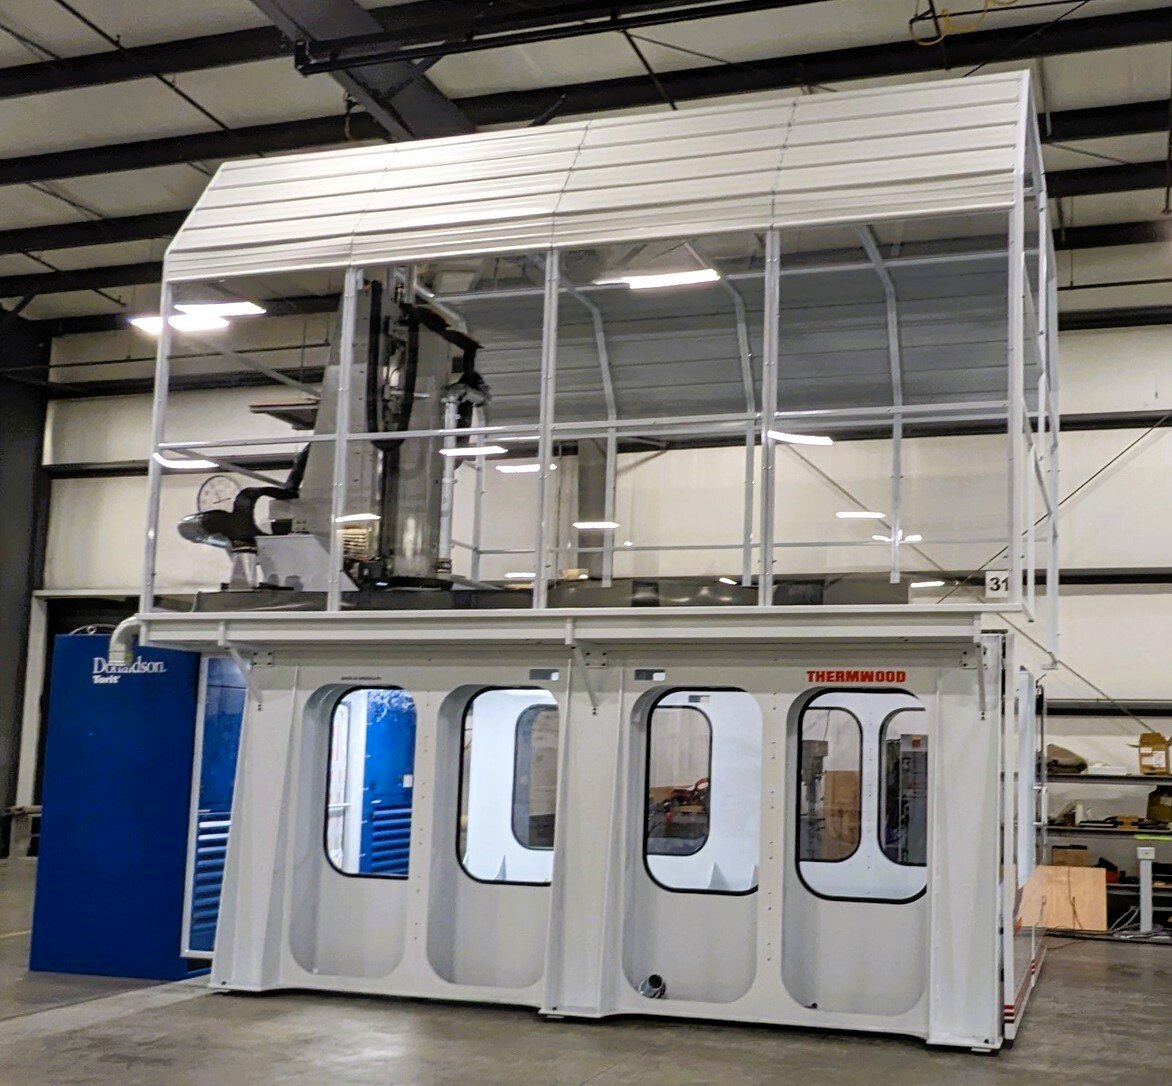 Ready to ship: Another 𝐓𝐡𝐞𝐫𝐦𝐰𝐨𝐨𝐝 𝐌𝐮𝐥𝐭𝐢𝐏𝐮𝐫𝐩𝐨𝐬𝐞 𝐌𝐨𝐝𝐞𝐥 𝟕𝟕 5Axis 5'x10' CNC router!